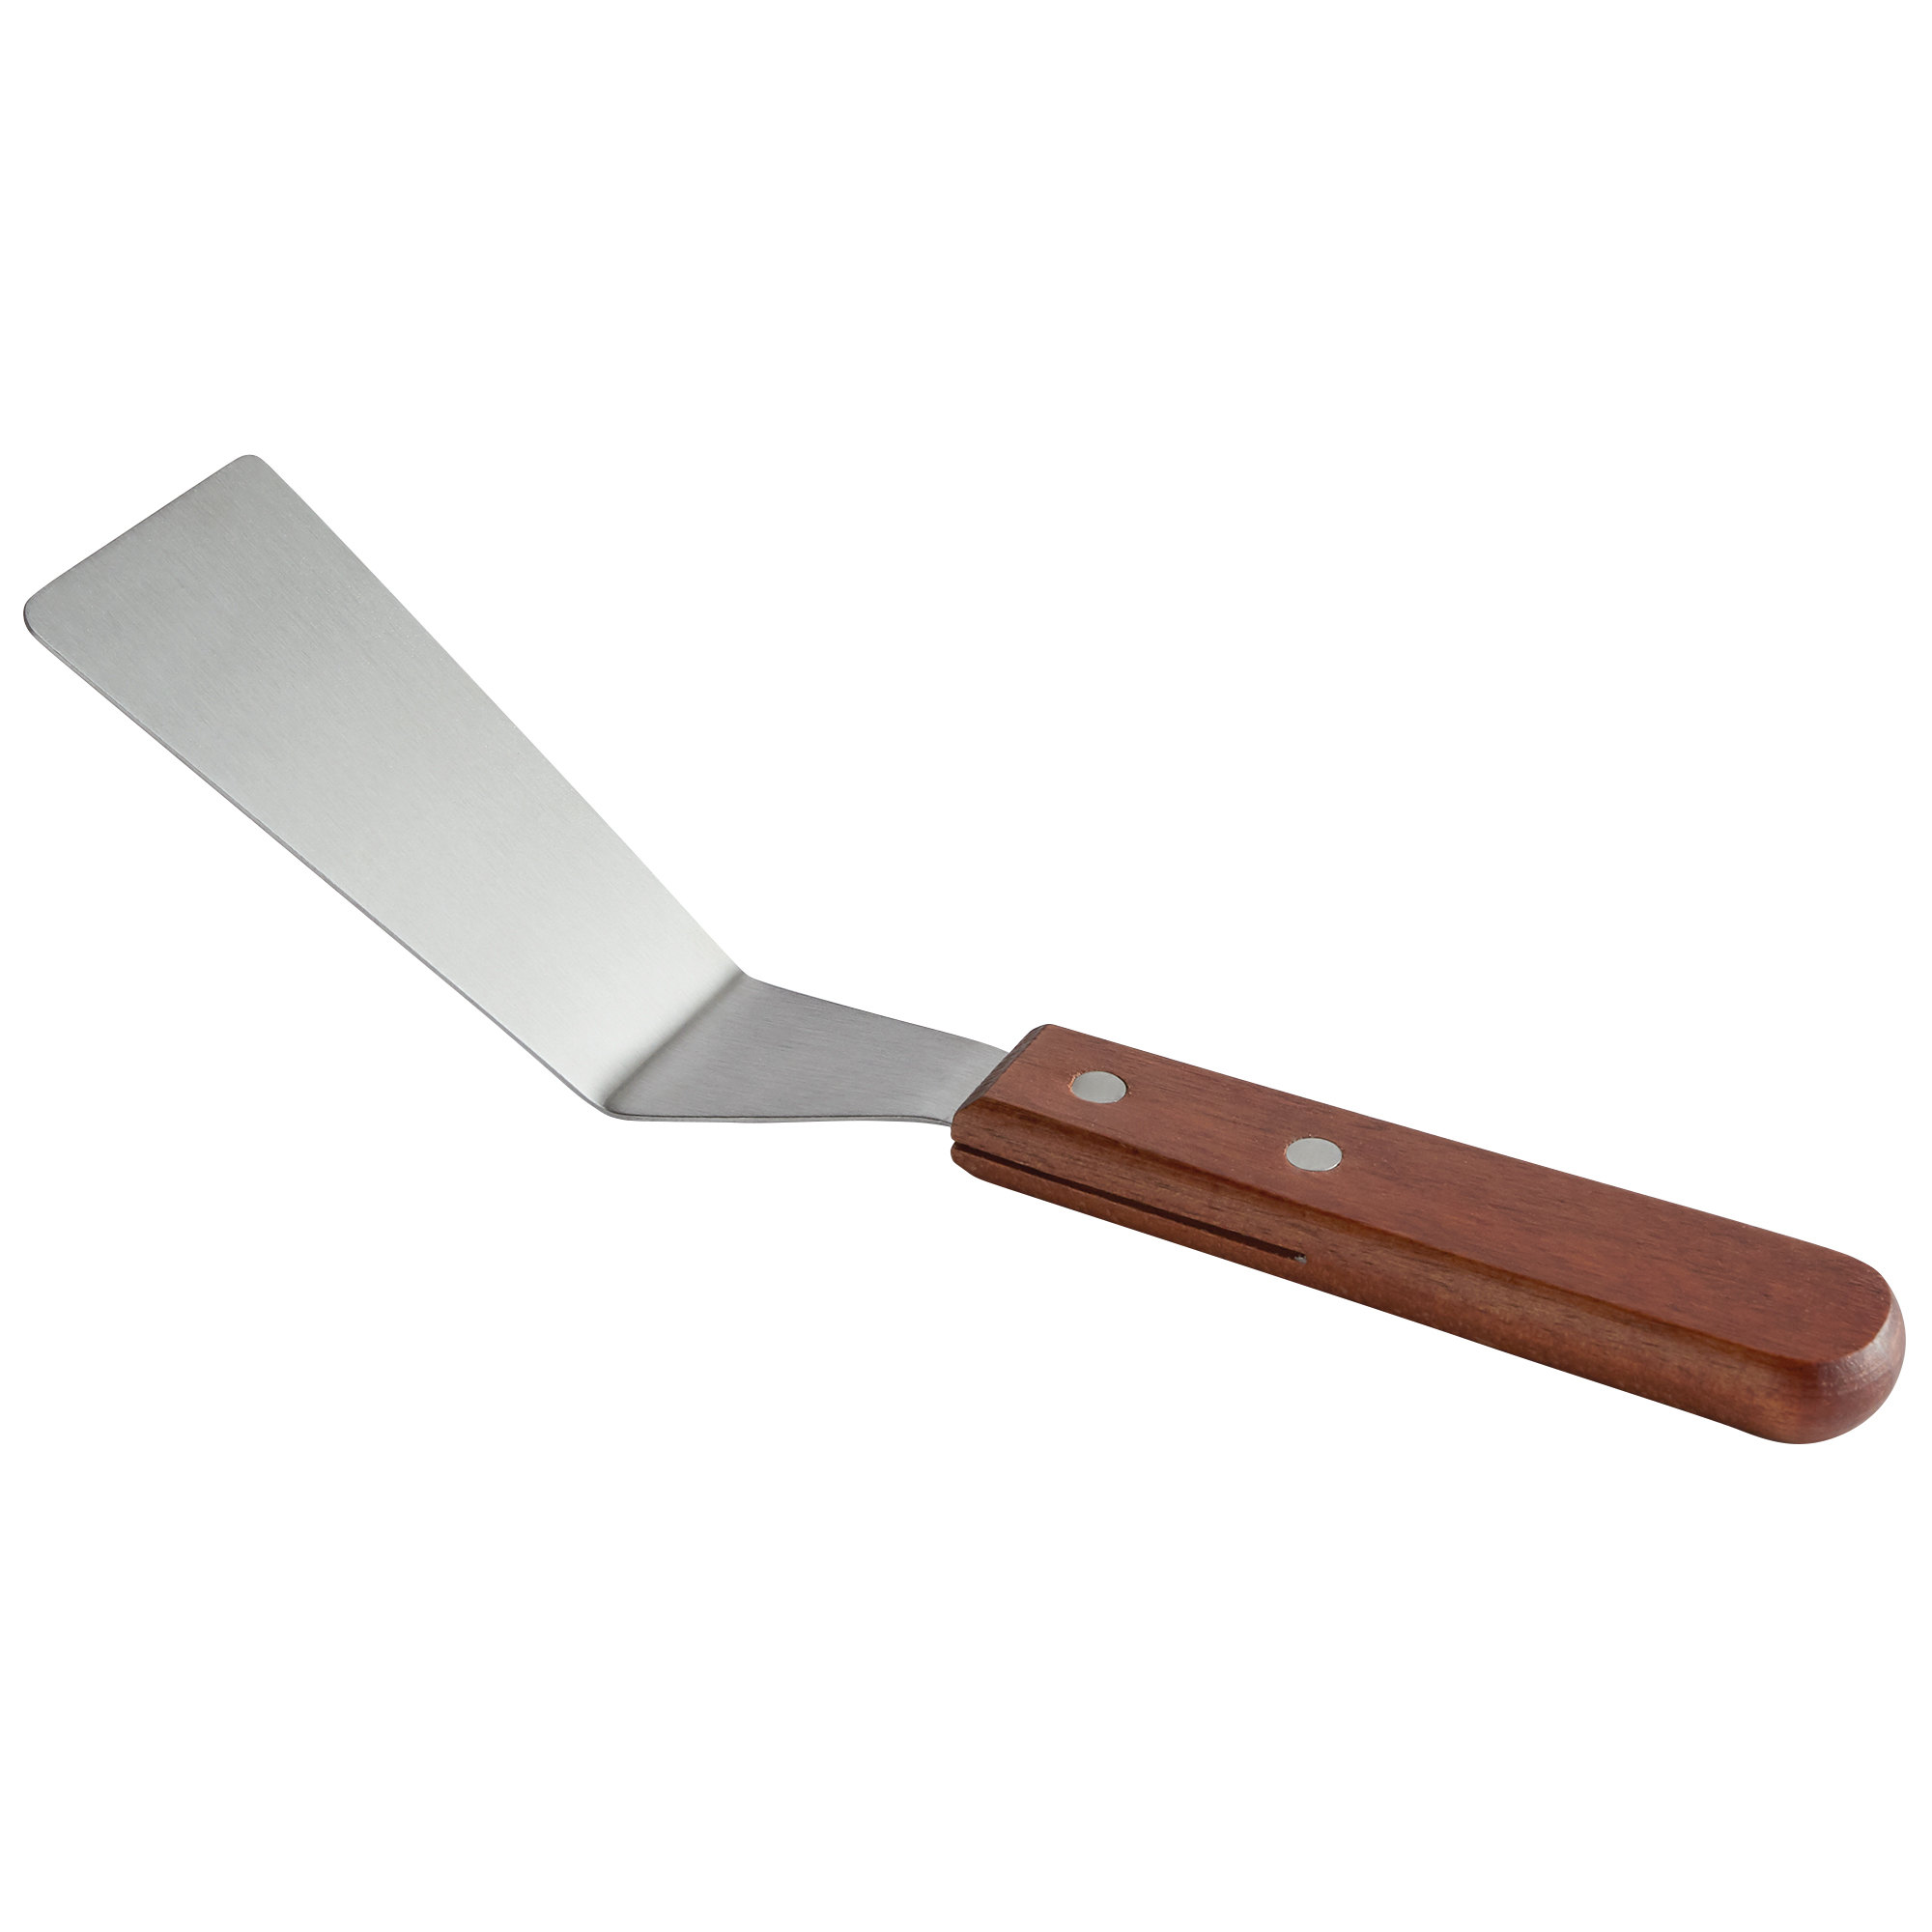 3'' x 5'' Square Pizza Server and Turner with Wood Handle